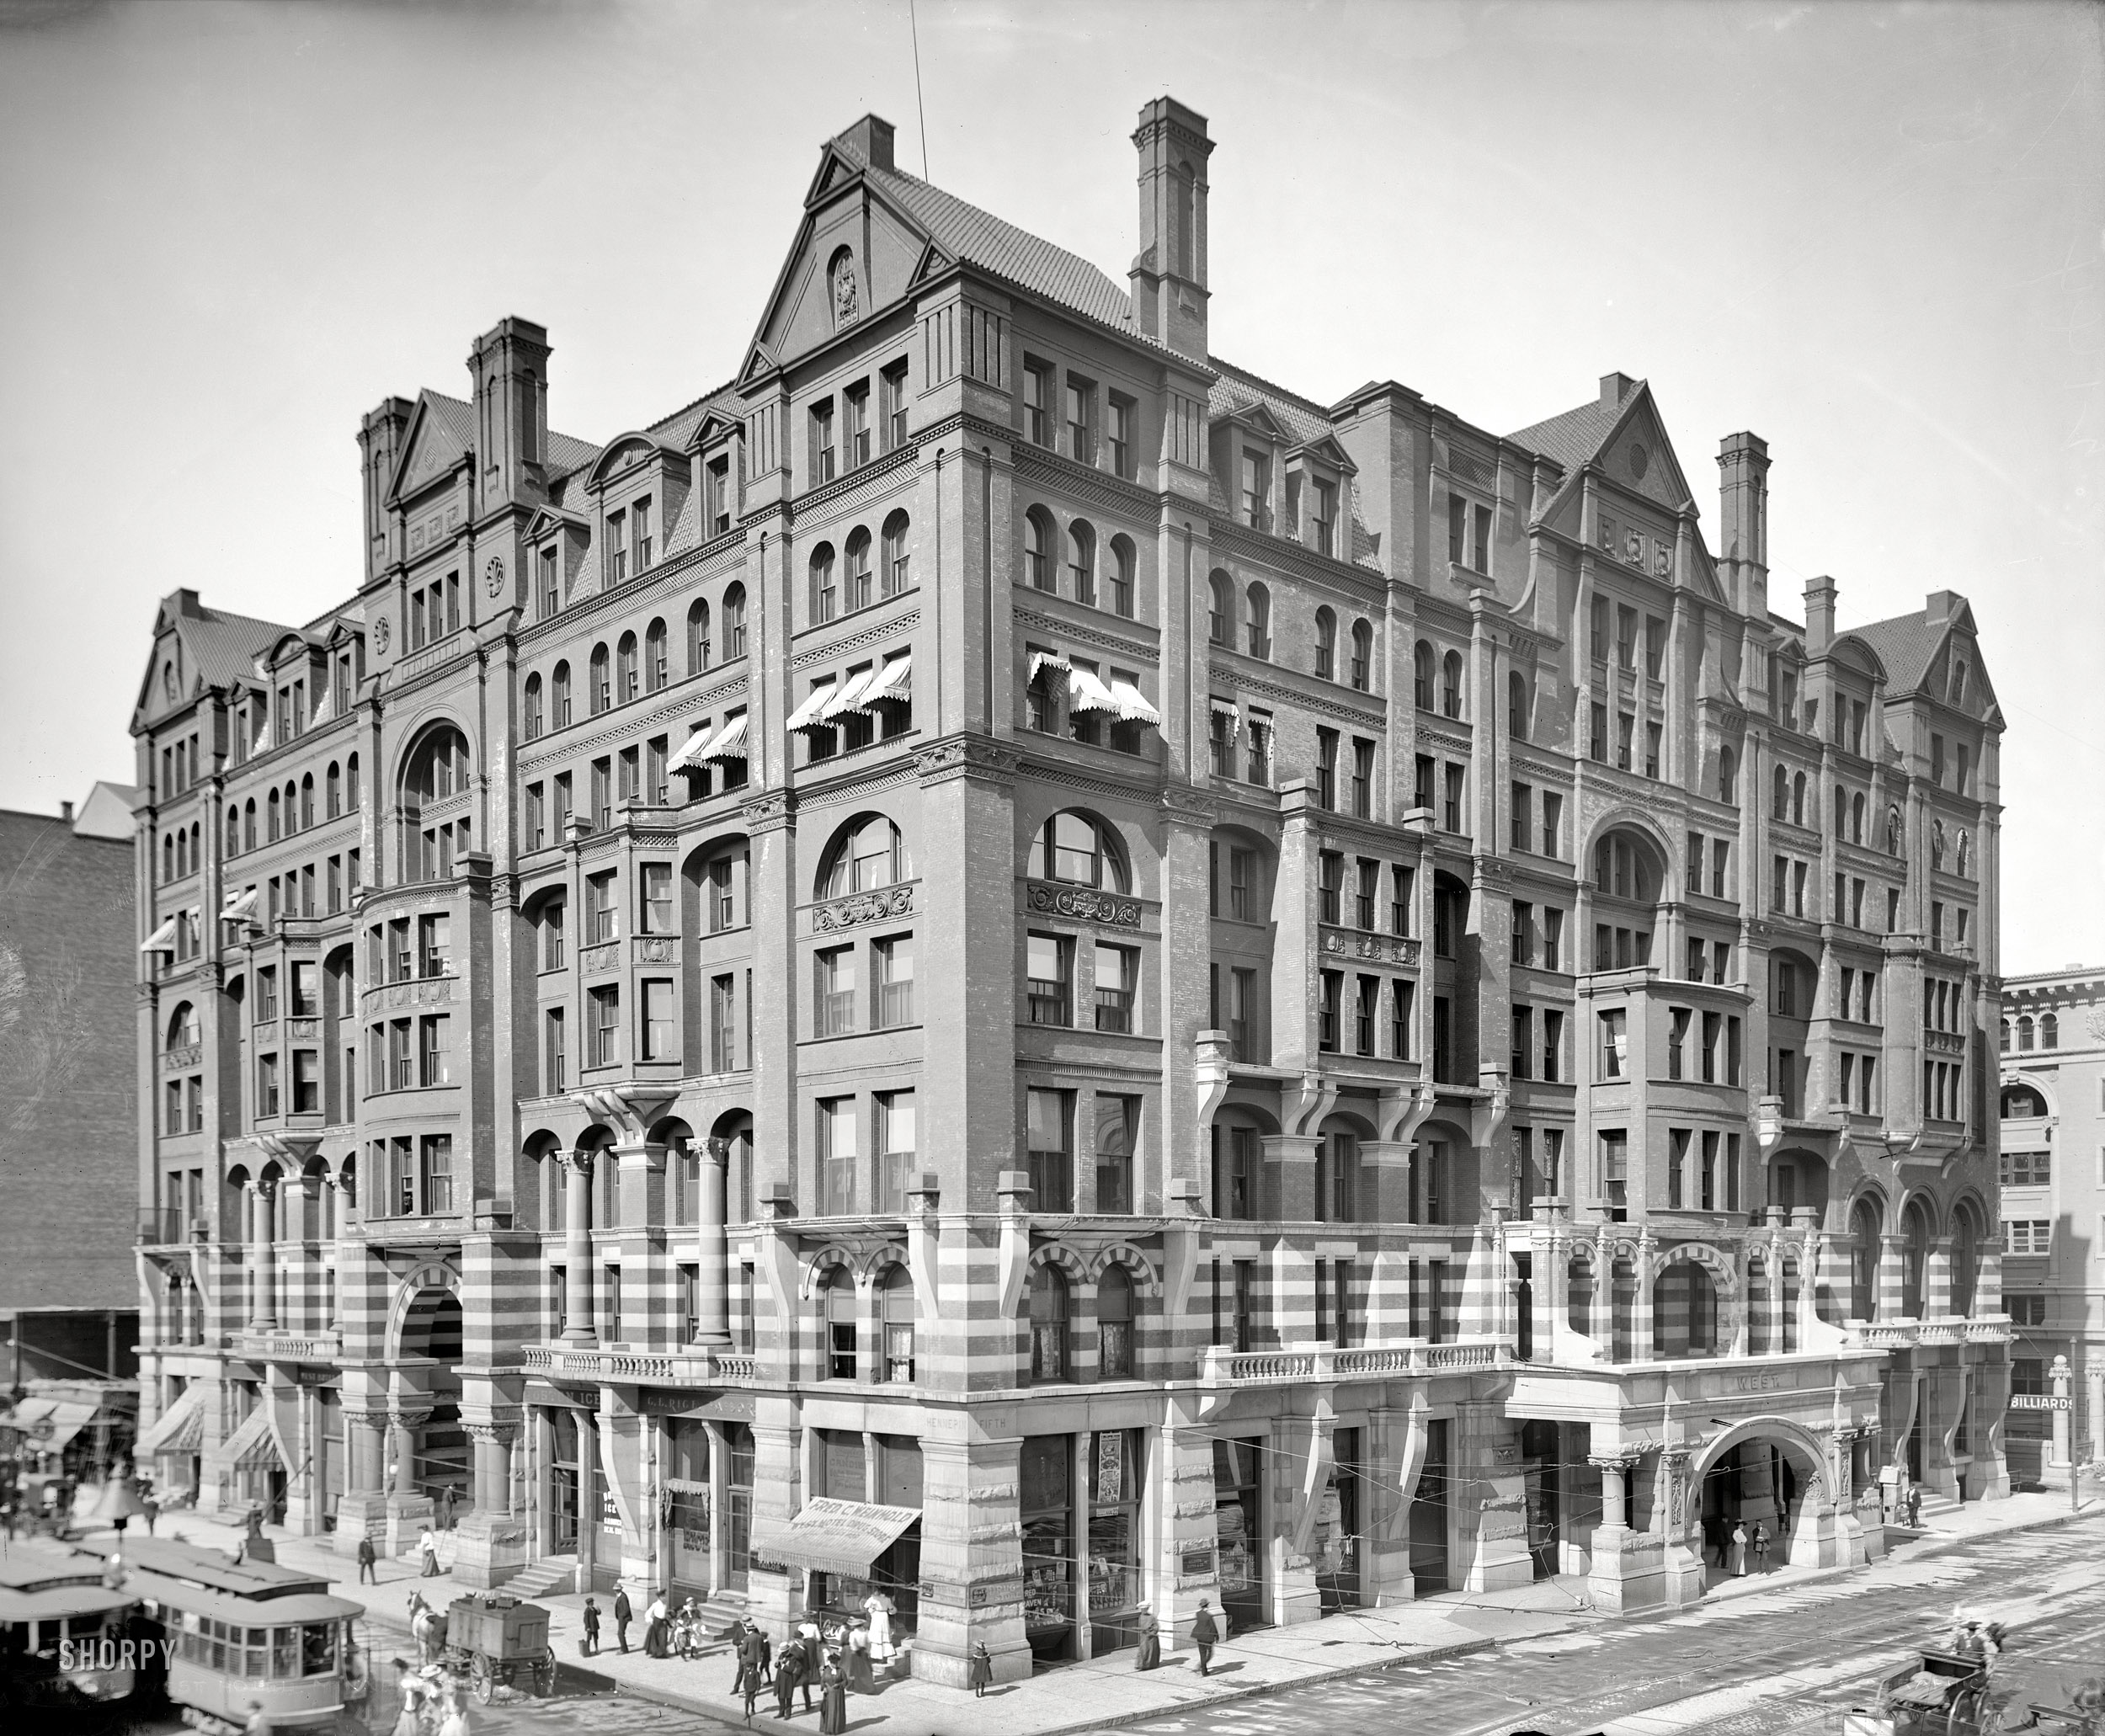 Minneapolis, Minnesota, circa 1905. "West Hotel." Busy both architecturally and commercially. 8x10 inch glass negative, Detroit Publishing Co. View full size.